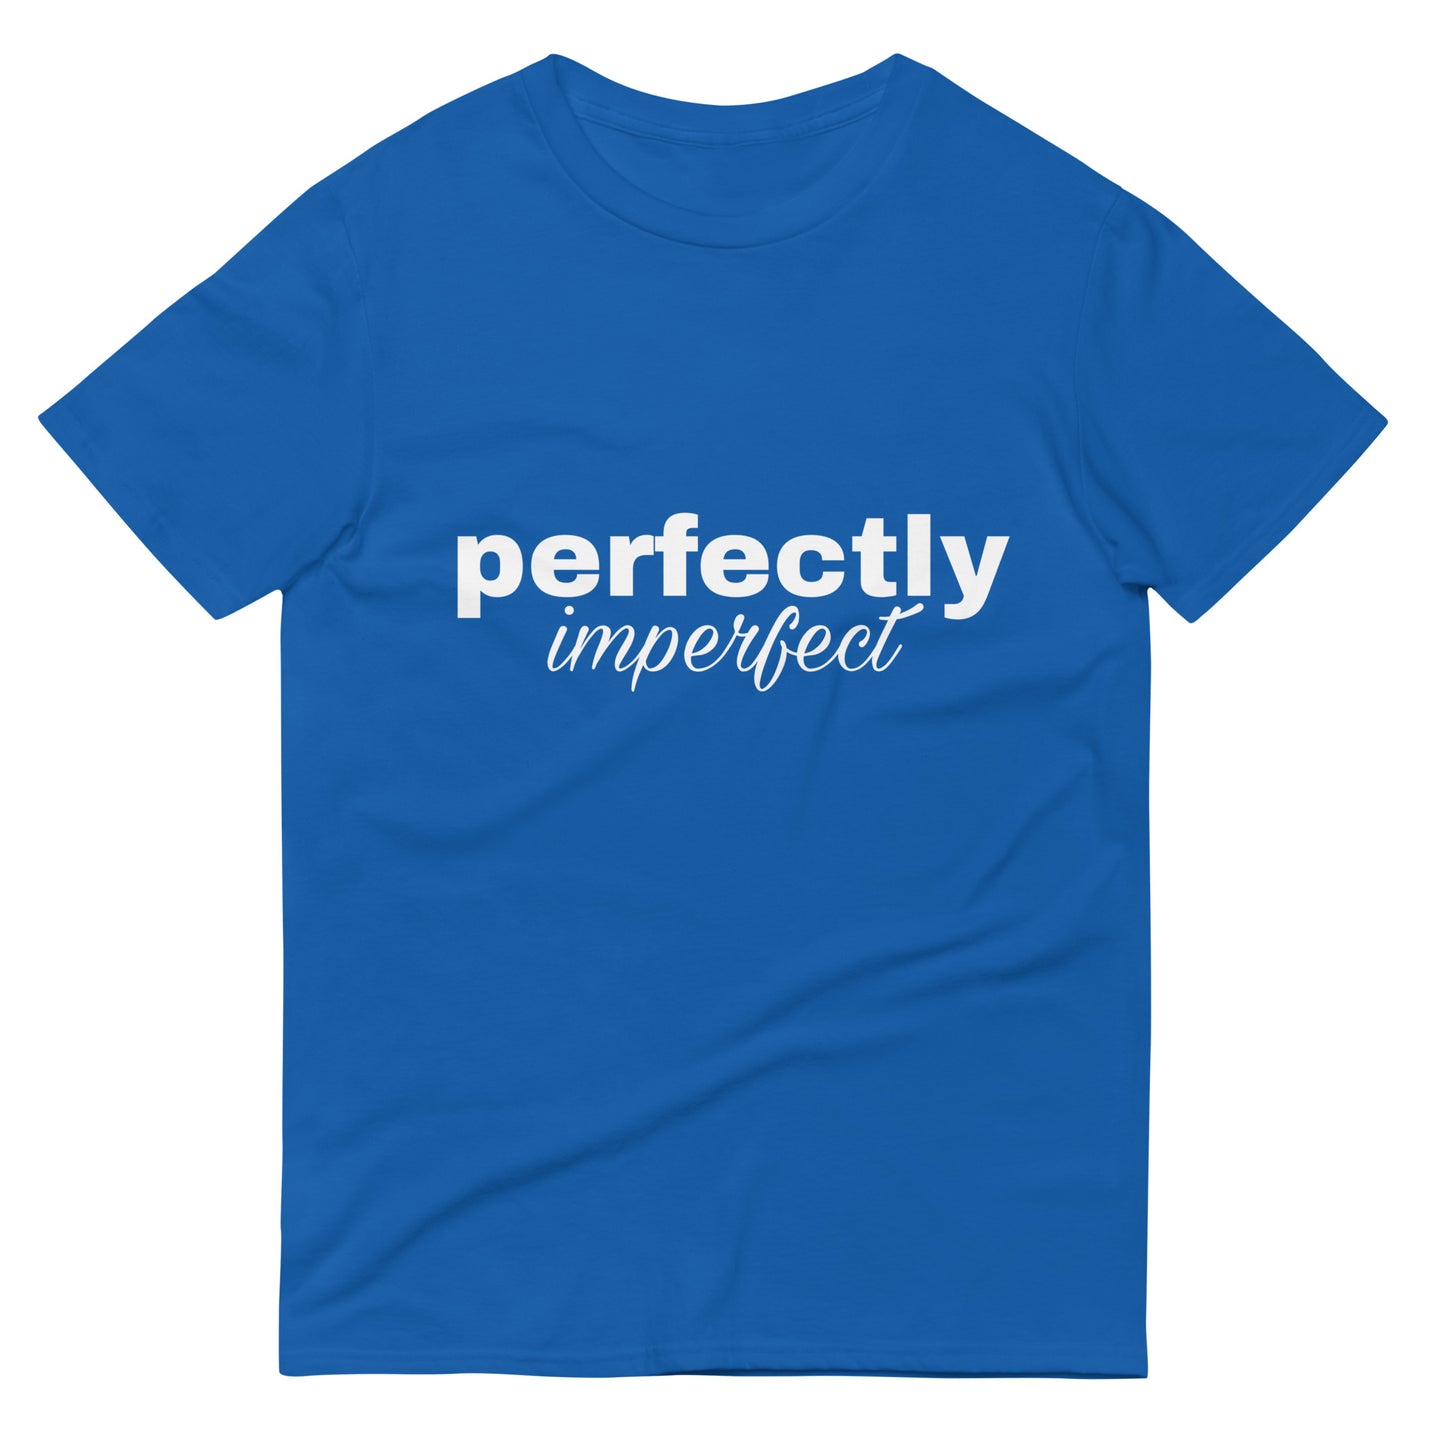 Perfectly Imperfect Short-Sleeve T-Shirt